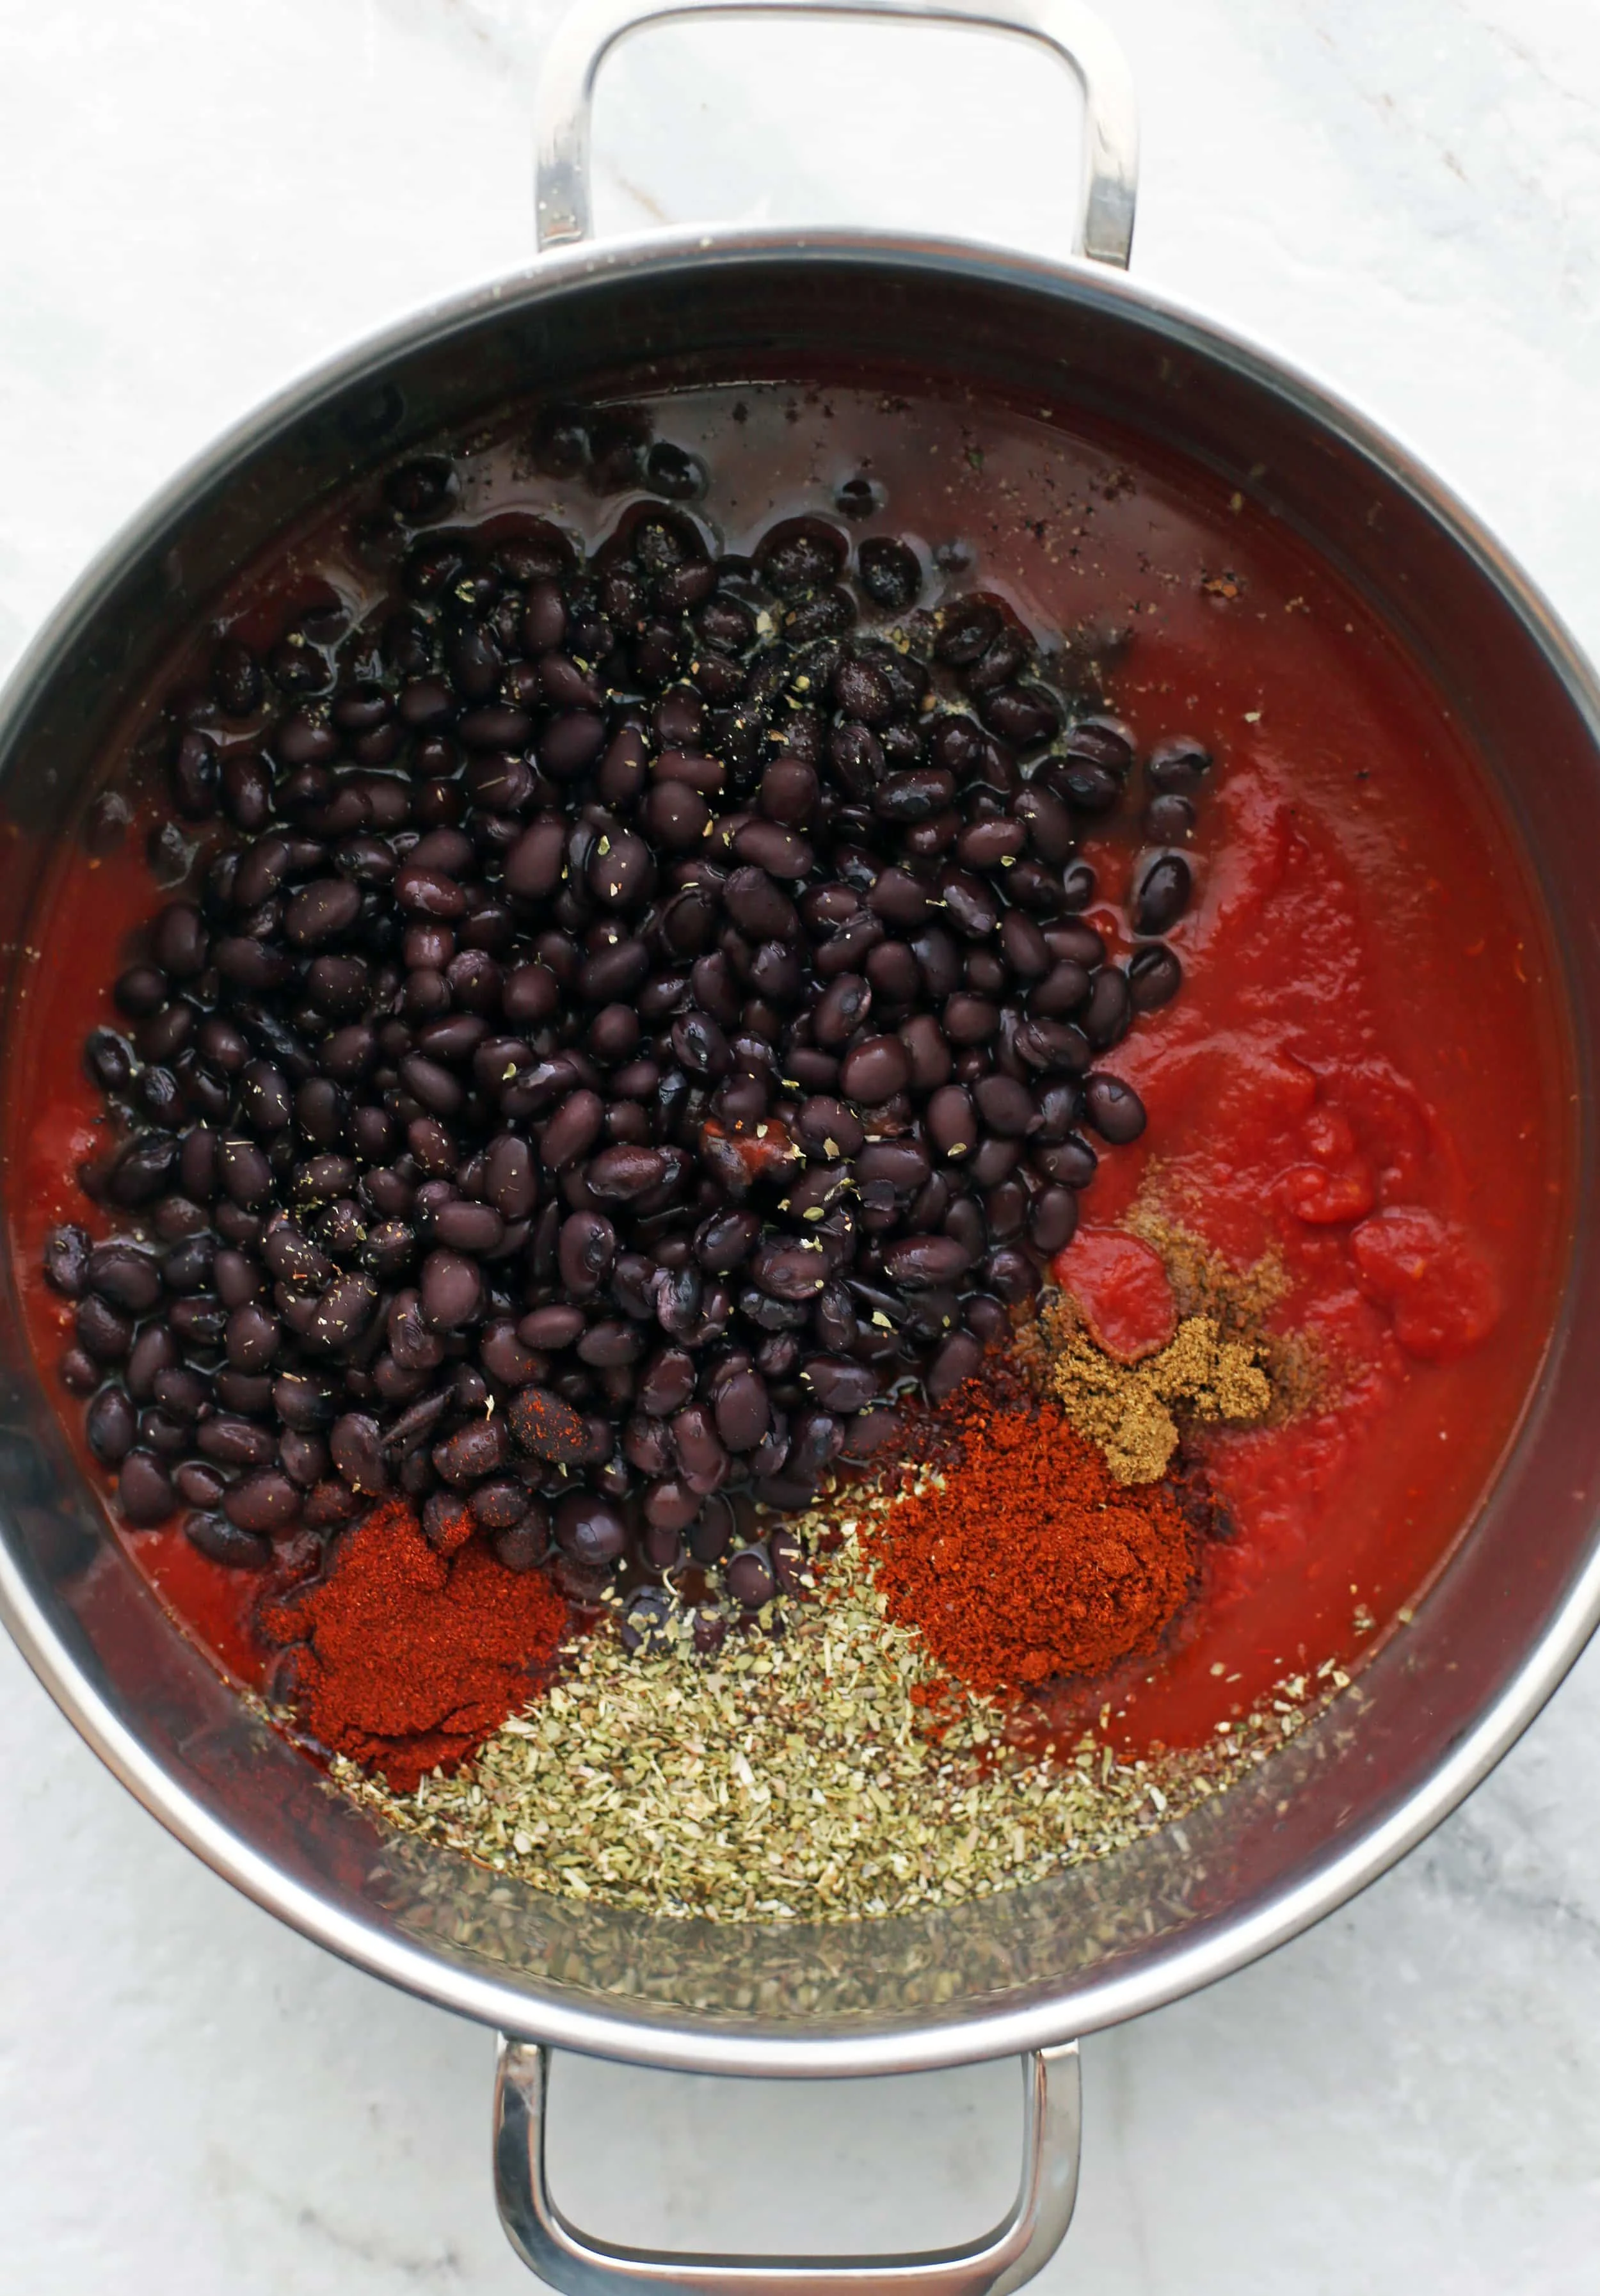 Black beans, spices, vegetable broth, and crushed tomatoes in a large metal pot.